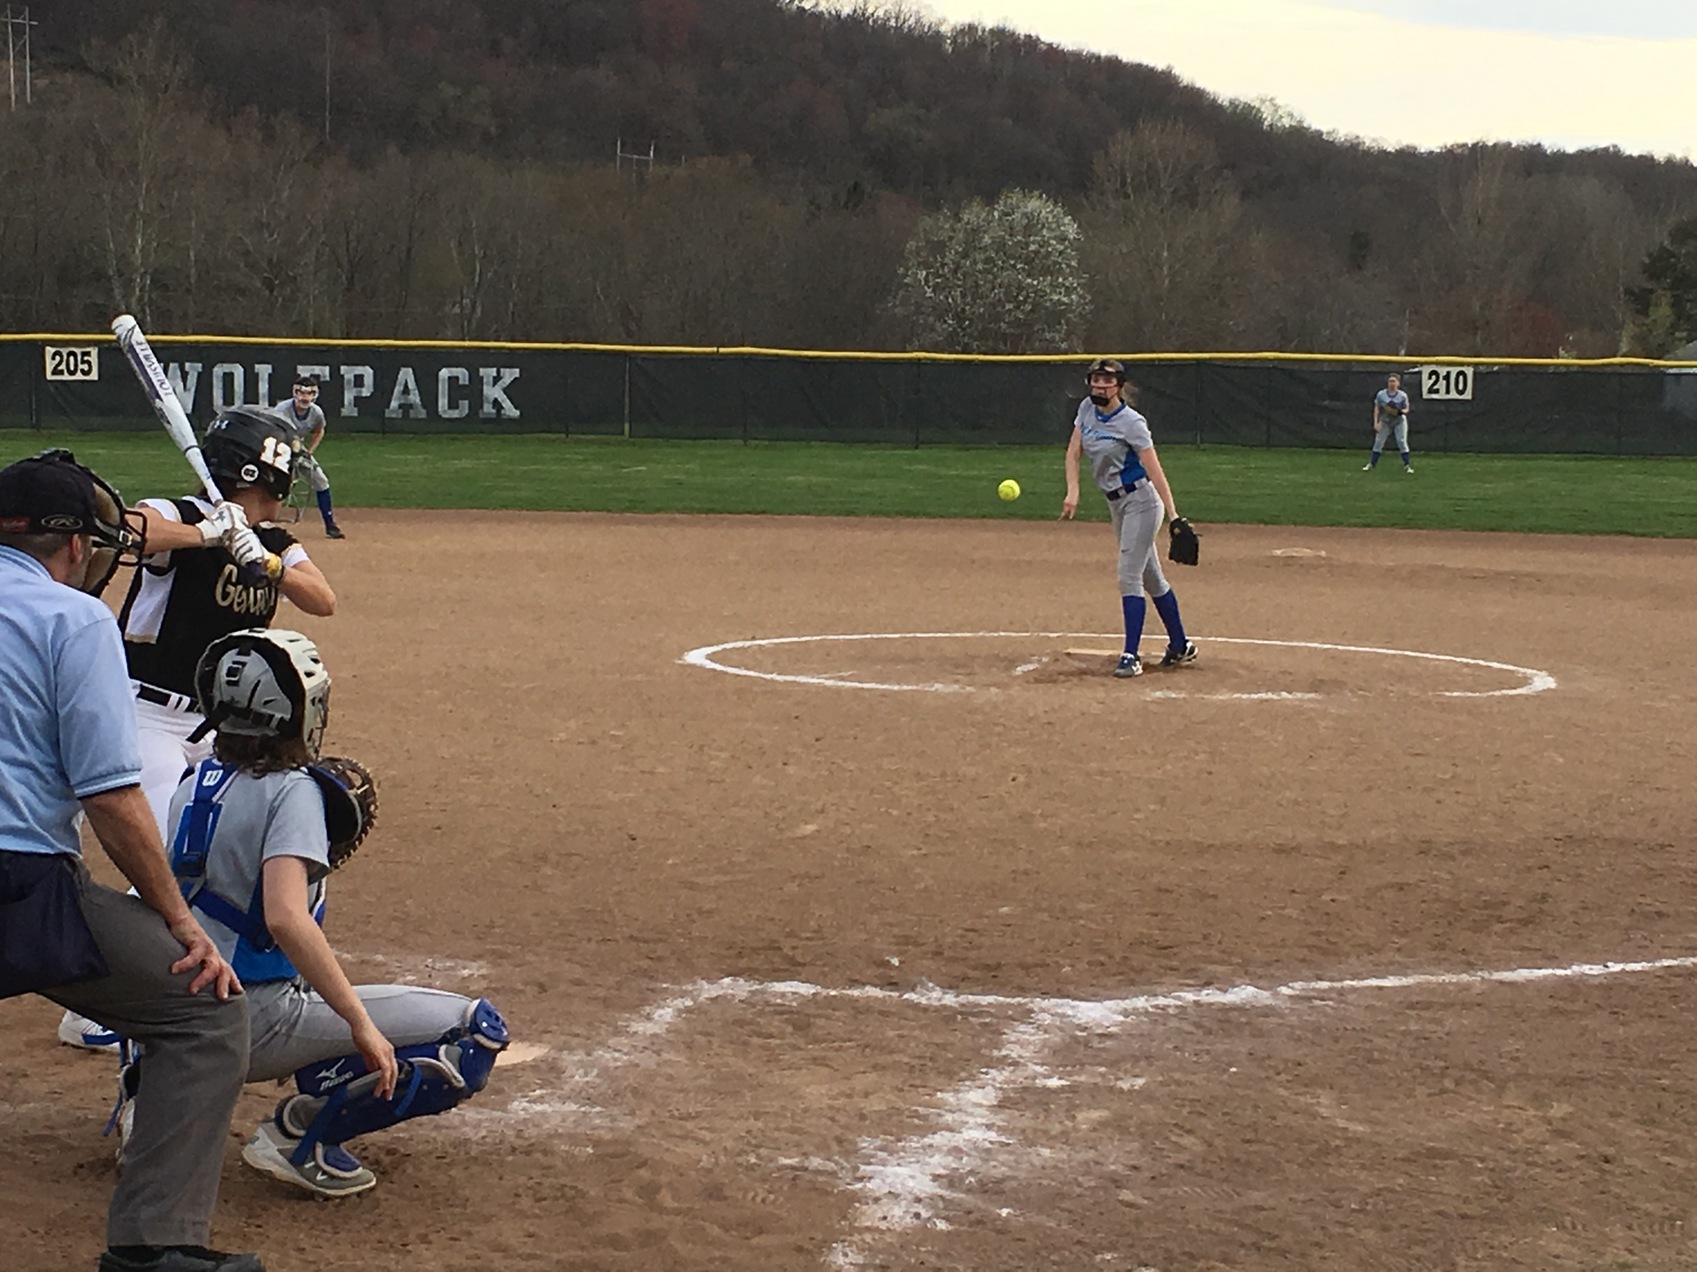 WOLFPACK SOFTBALL DROPS TWO HARD-FOUGHT GAMES TO GENEVA JV